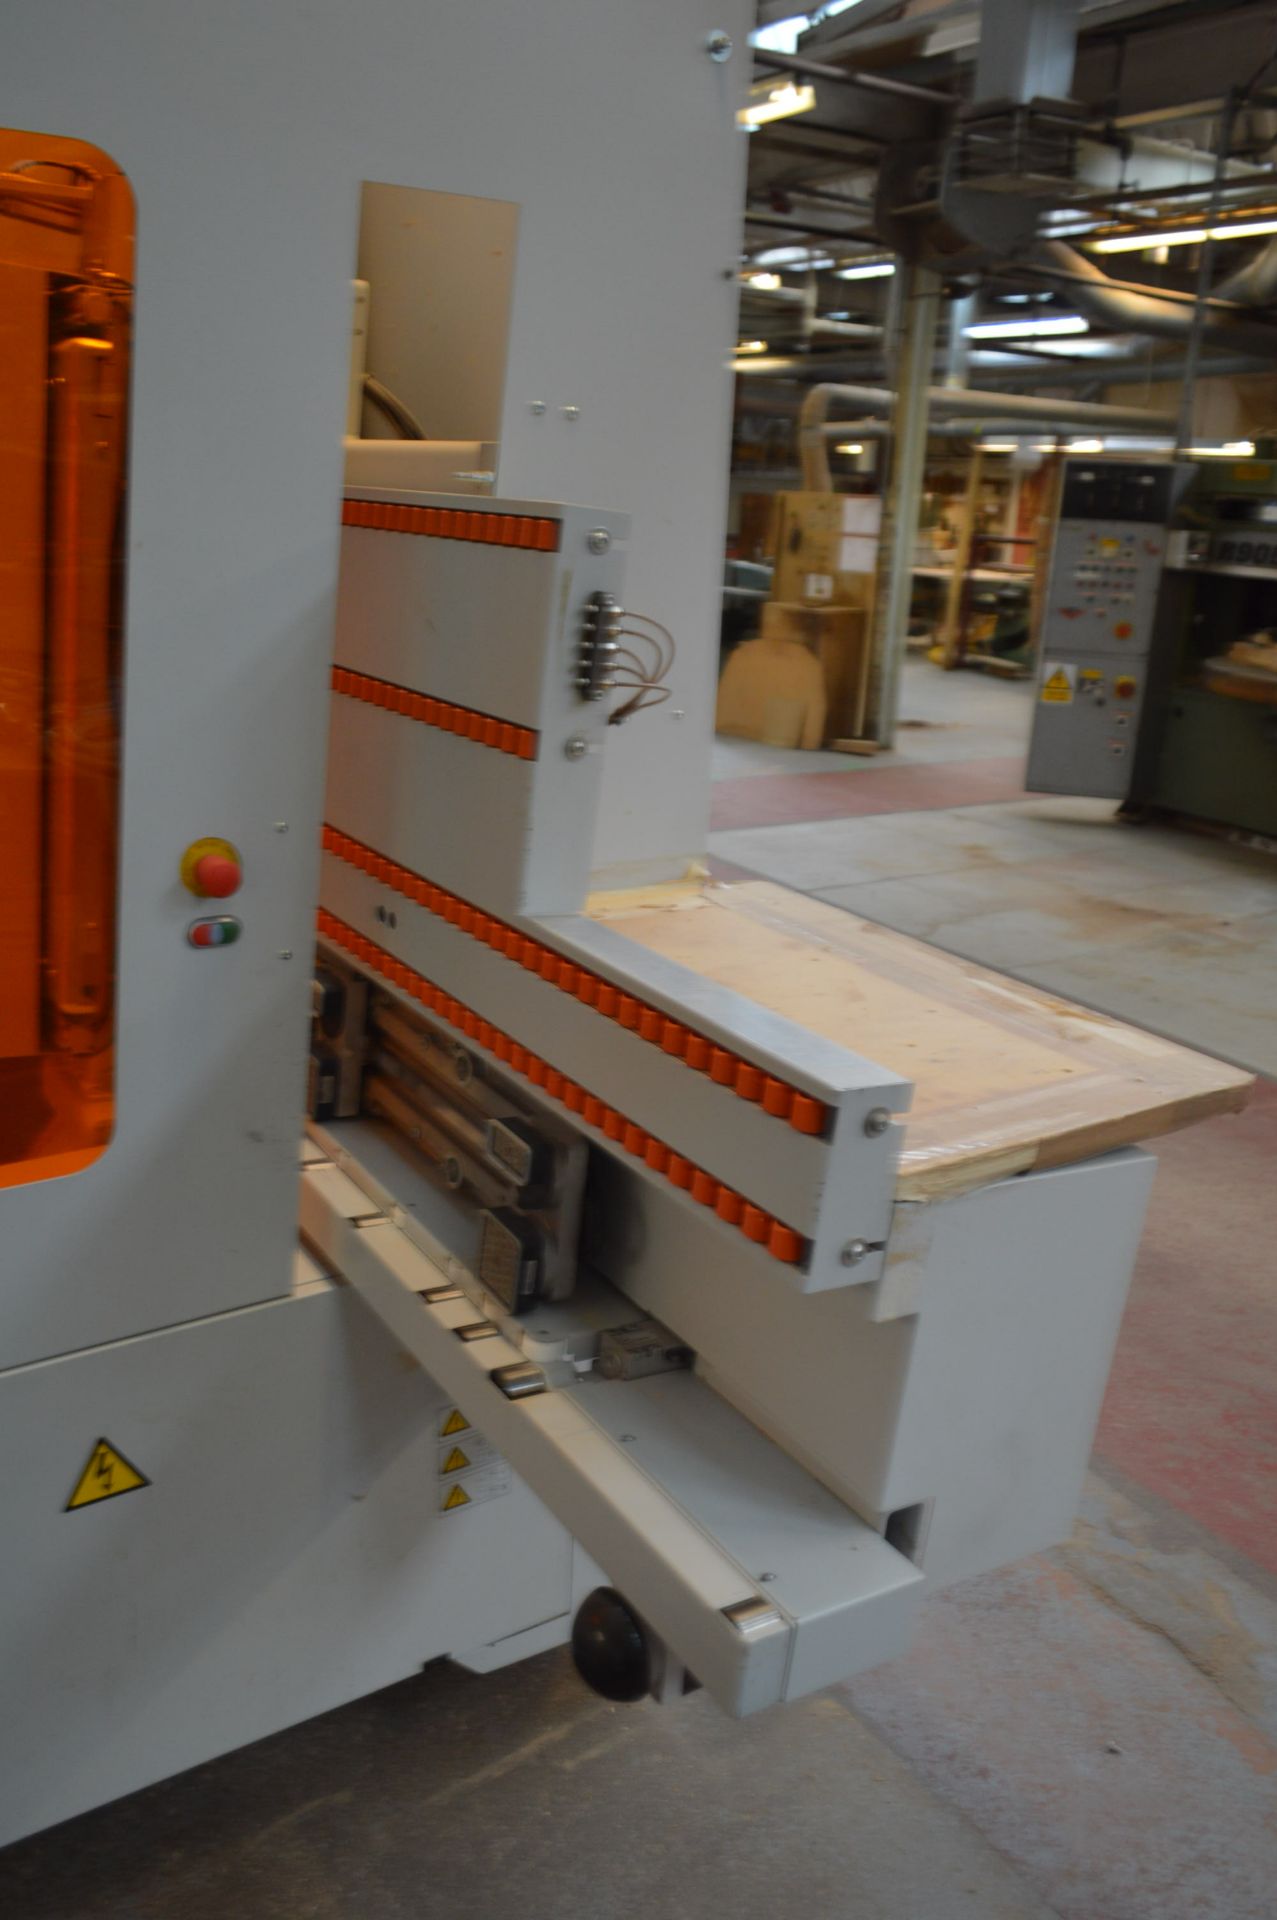 Holz-Her EVOLUTION 7405 CNC PROCESSING CENTRE, serial No. 199/1-407, year of manufacture 2014, - Image 8 of 15